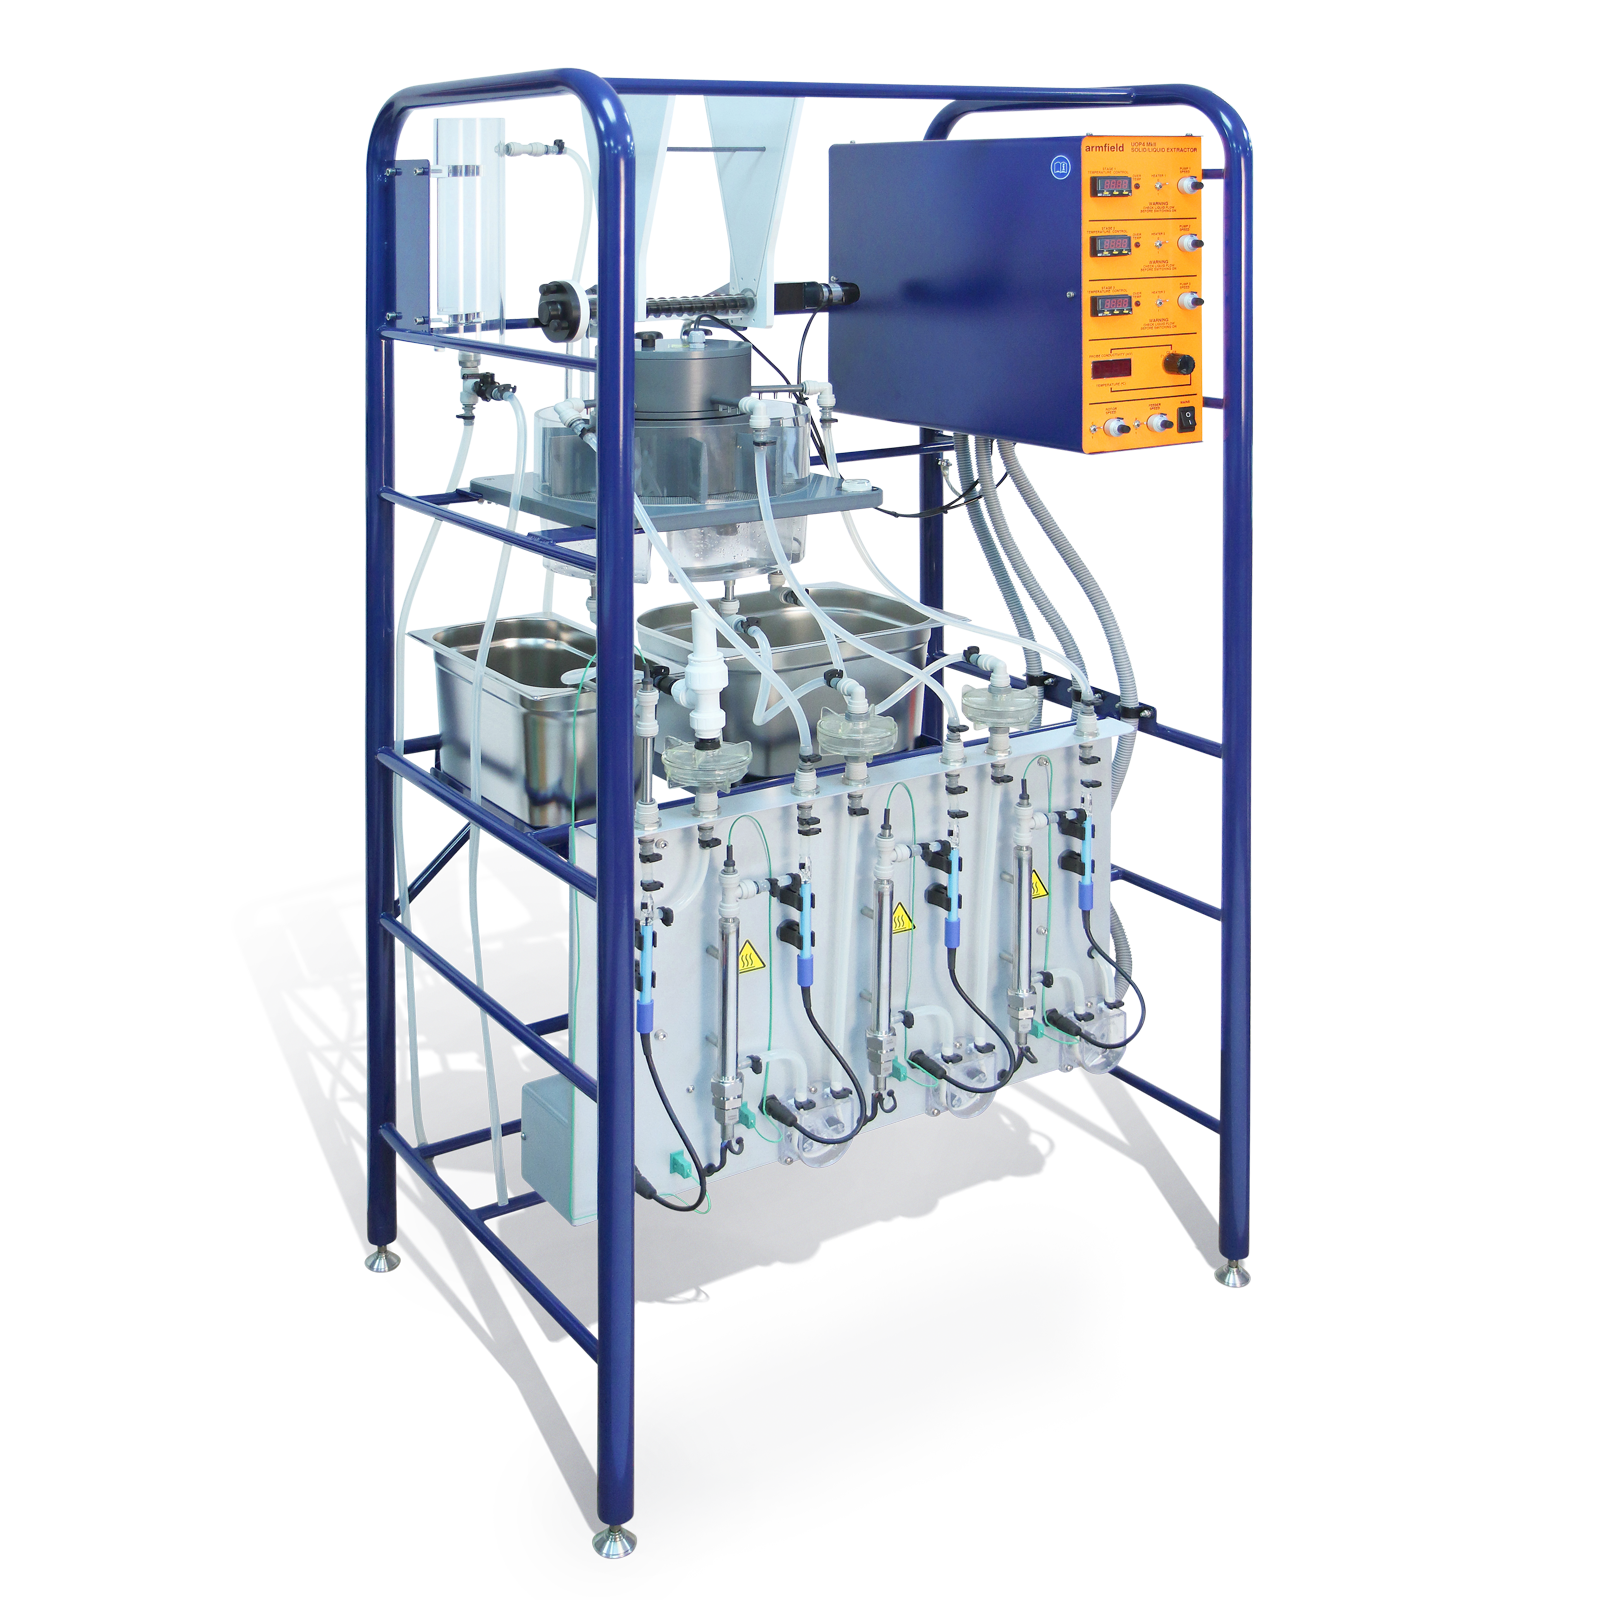 Uop4 Mkii Solid Liquid Extraction Unit Armfield